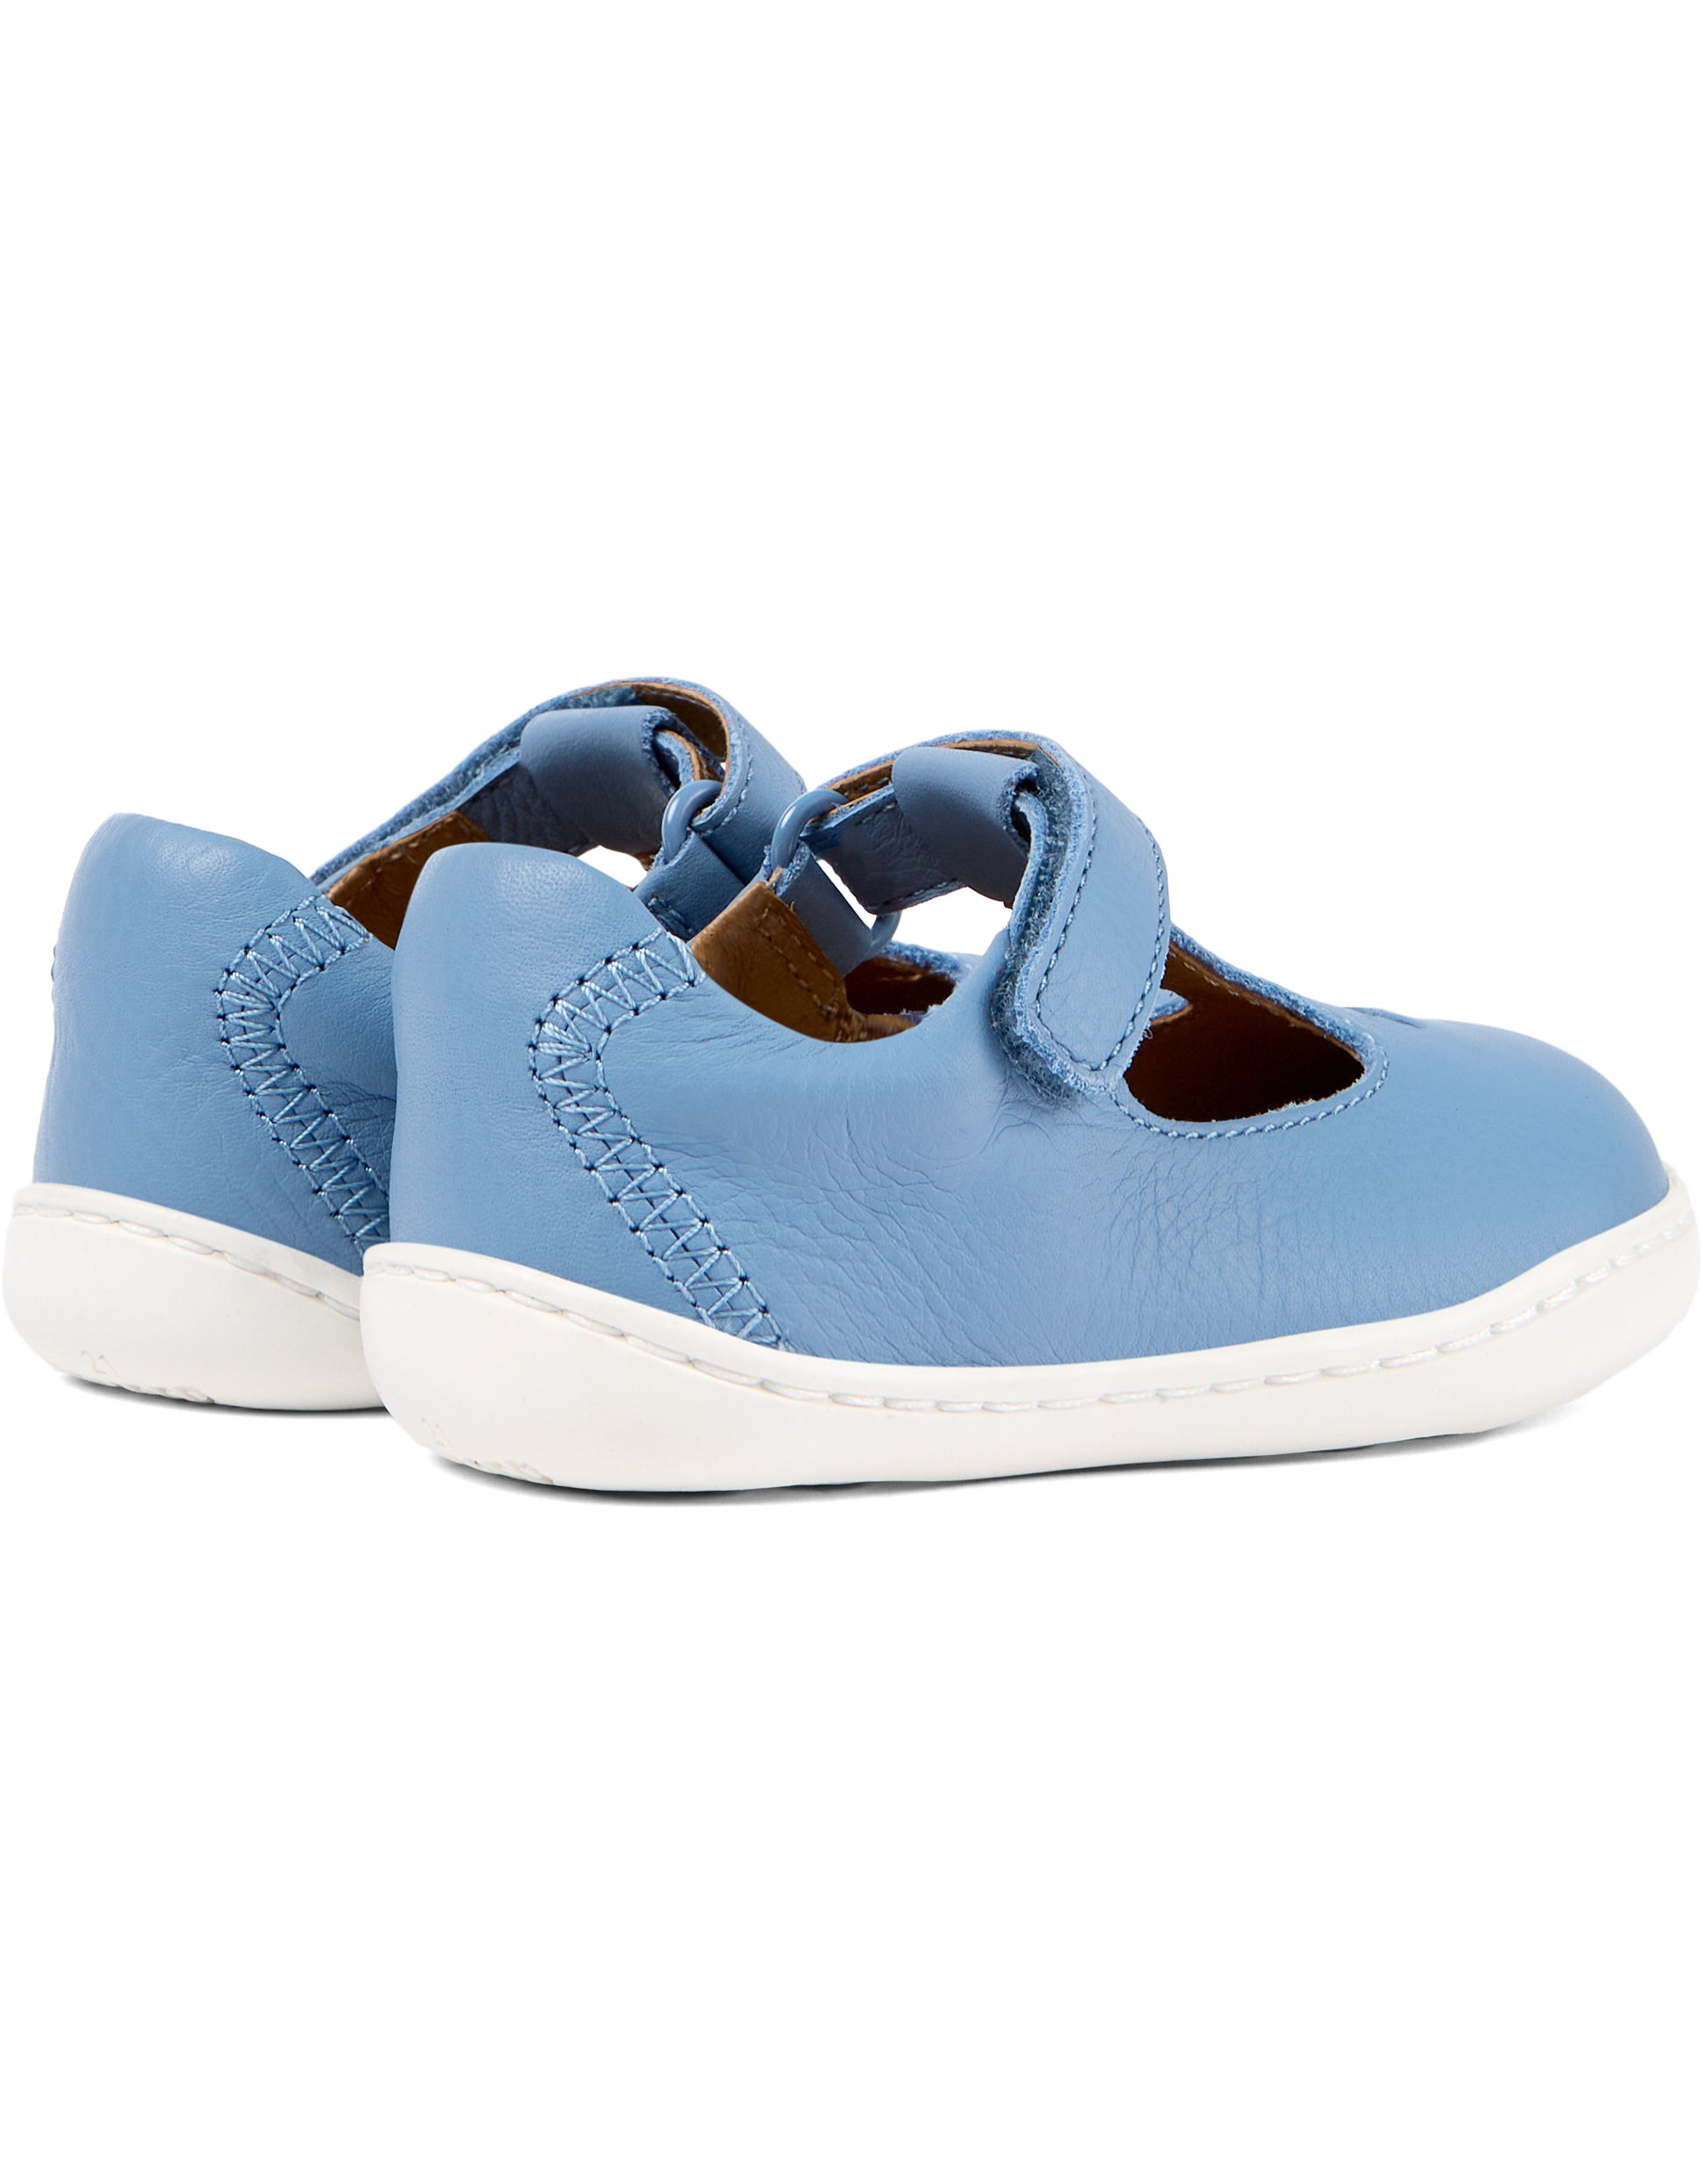 A T-bar shoe by Camper, style K800564-001, in blue with cut out fish detail. Velcro fastening. Rear angled view of a pair.